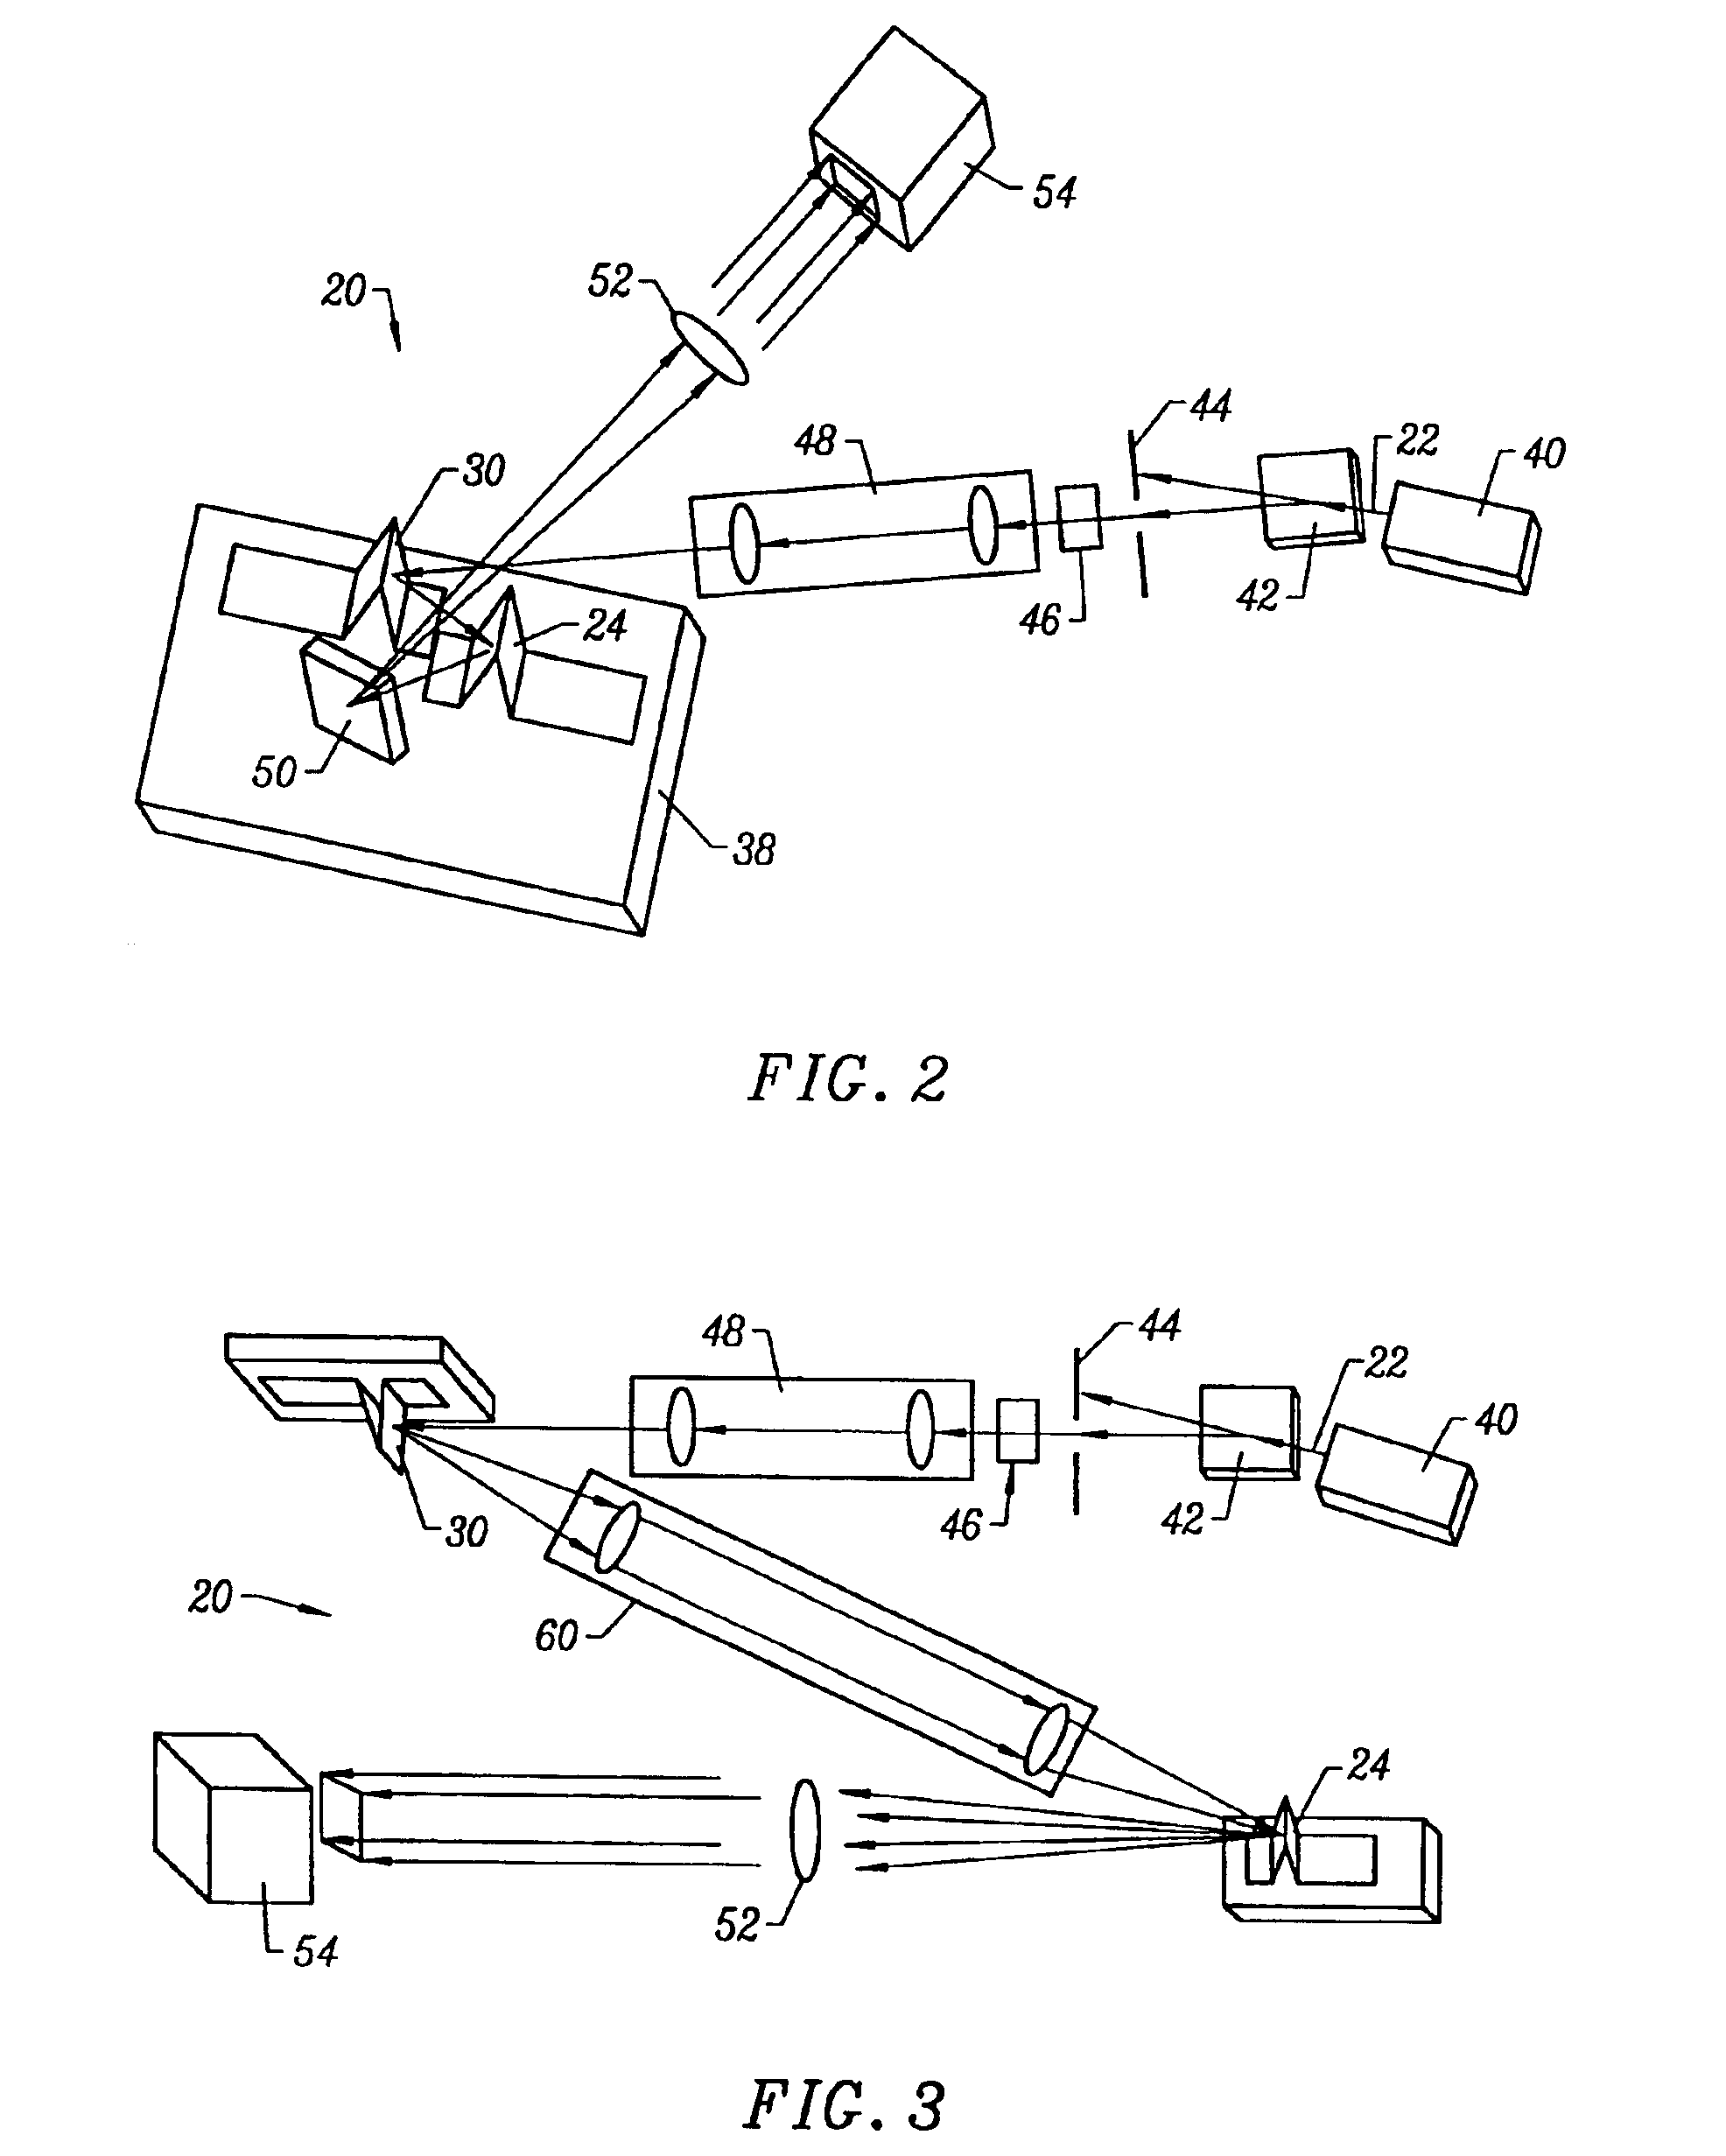 Apparatus and method for optical raster-scanning in a micromechanical system